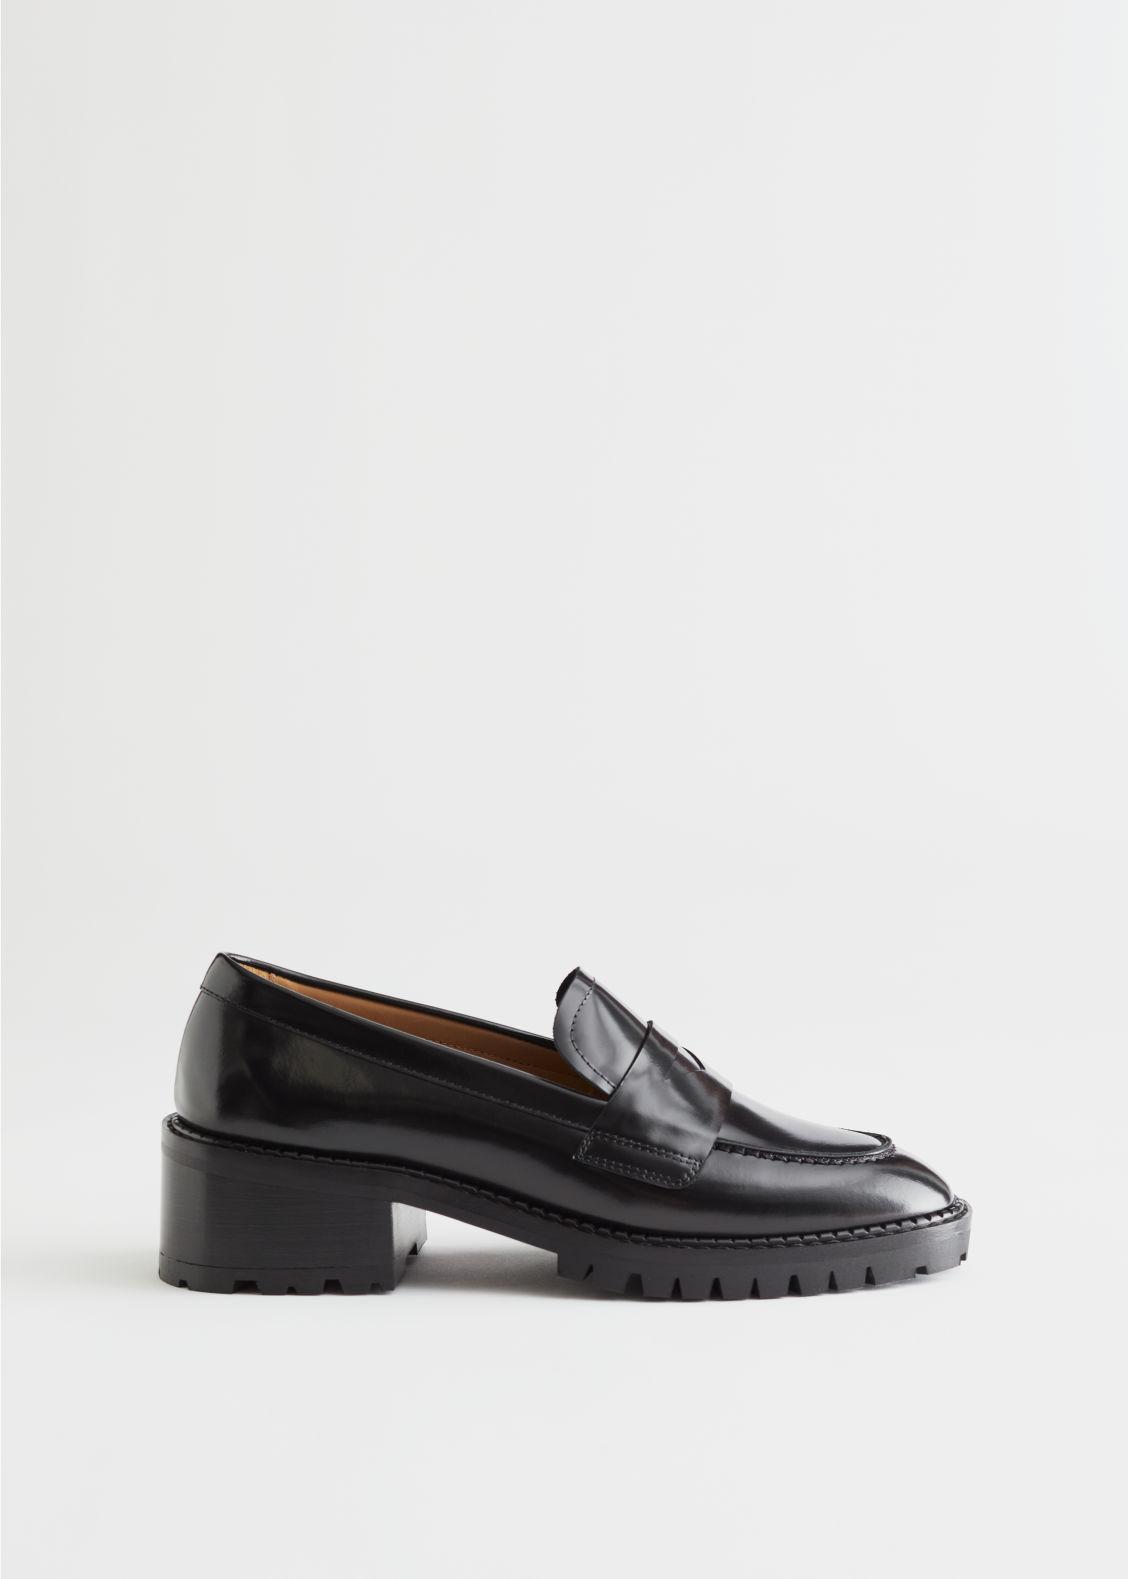 & Other Stories Heeled Leather Penny Loafers in Black | Lyst